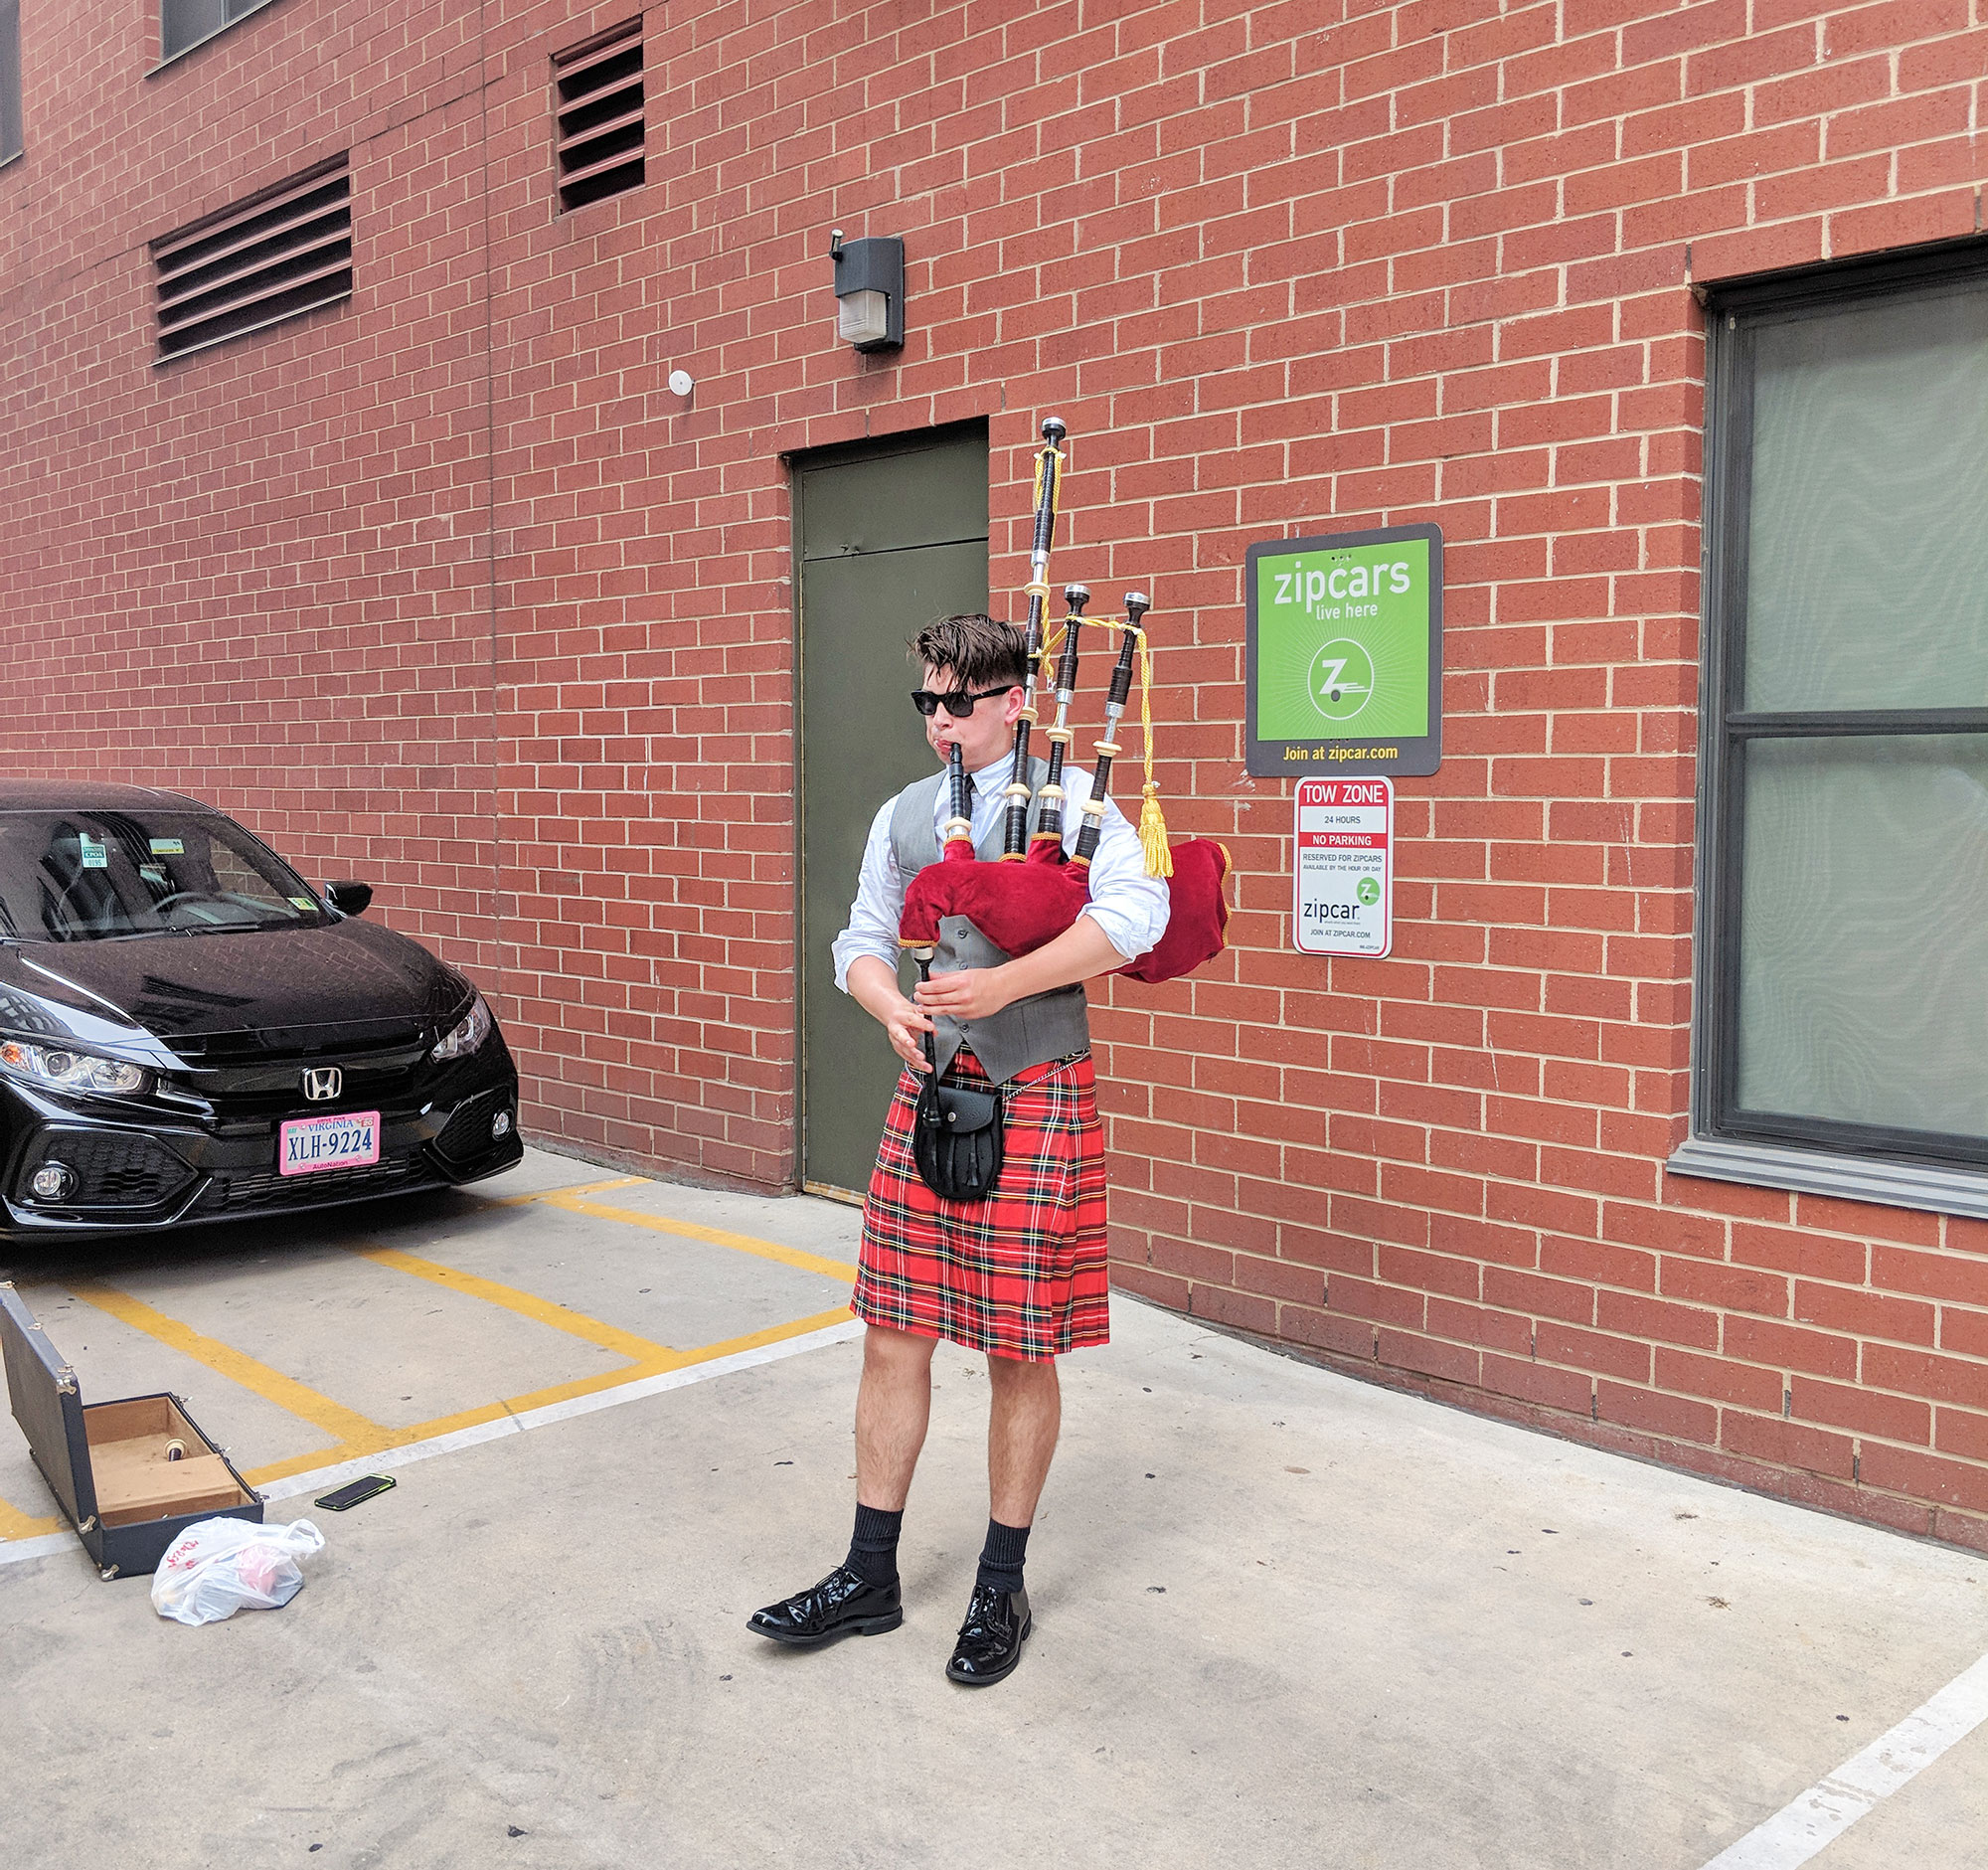 A random bagpipe player on July 4th in Chinatown.